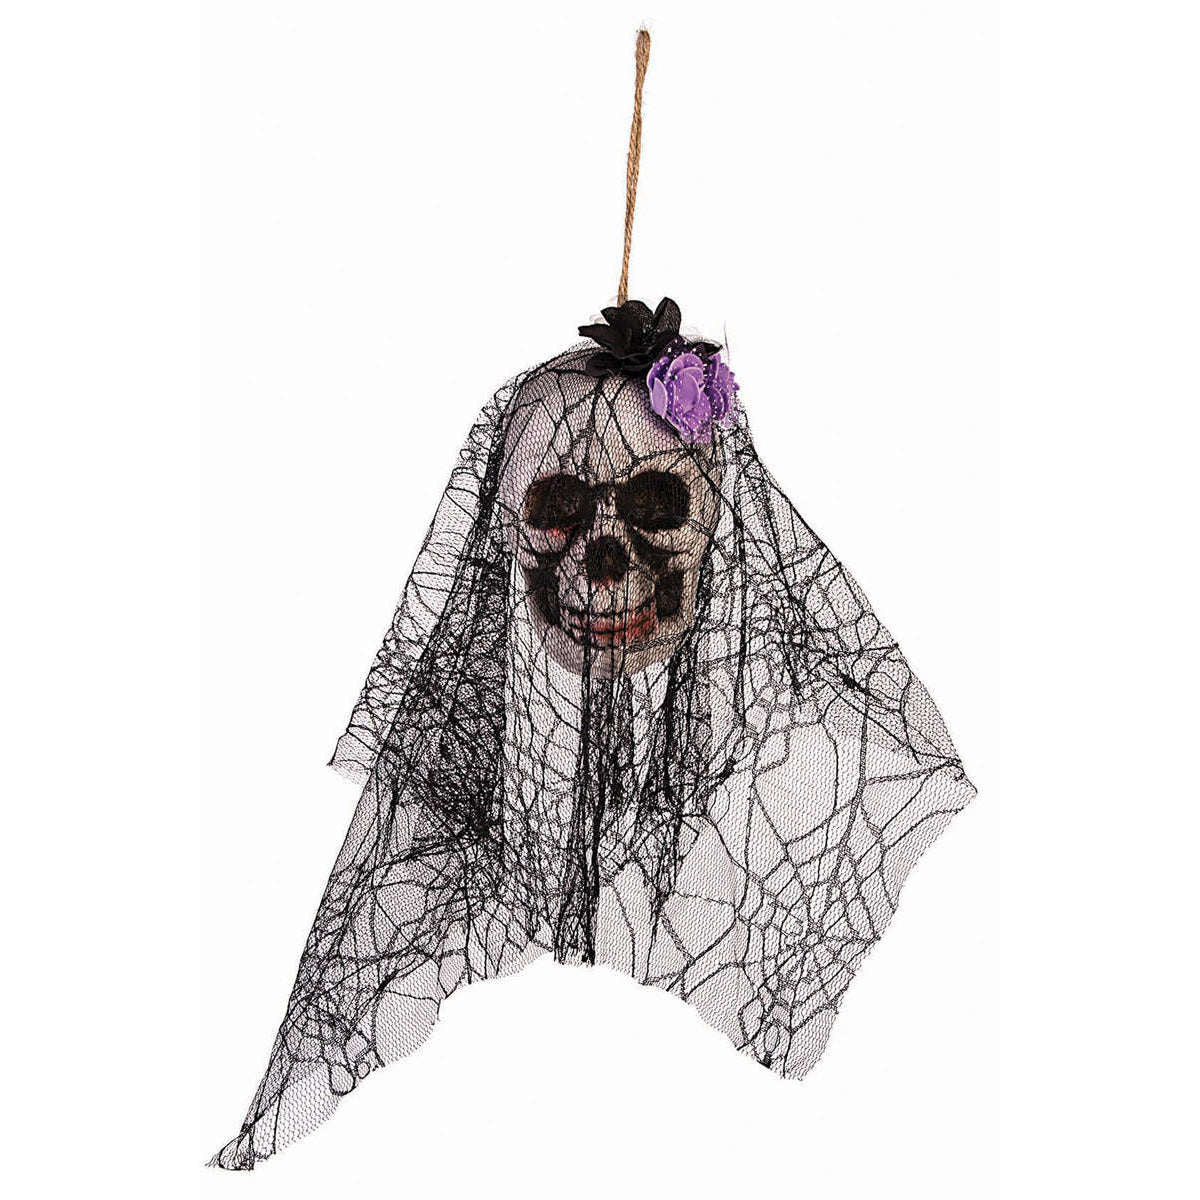 Hanging Foam Skull with Black Lace Veil